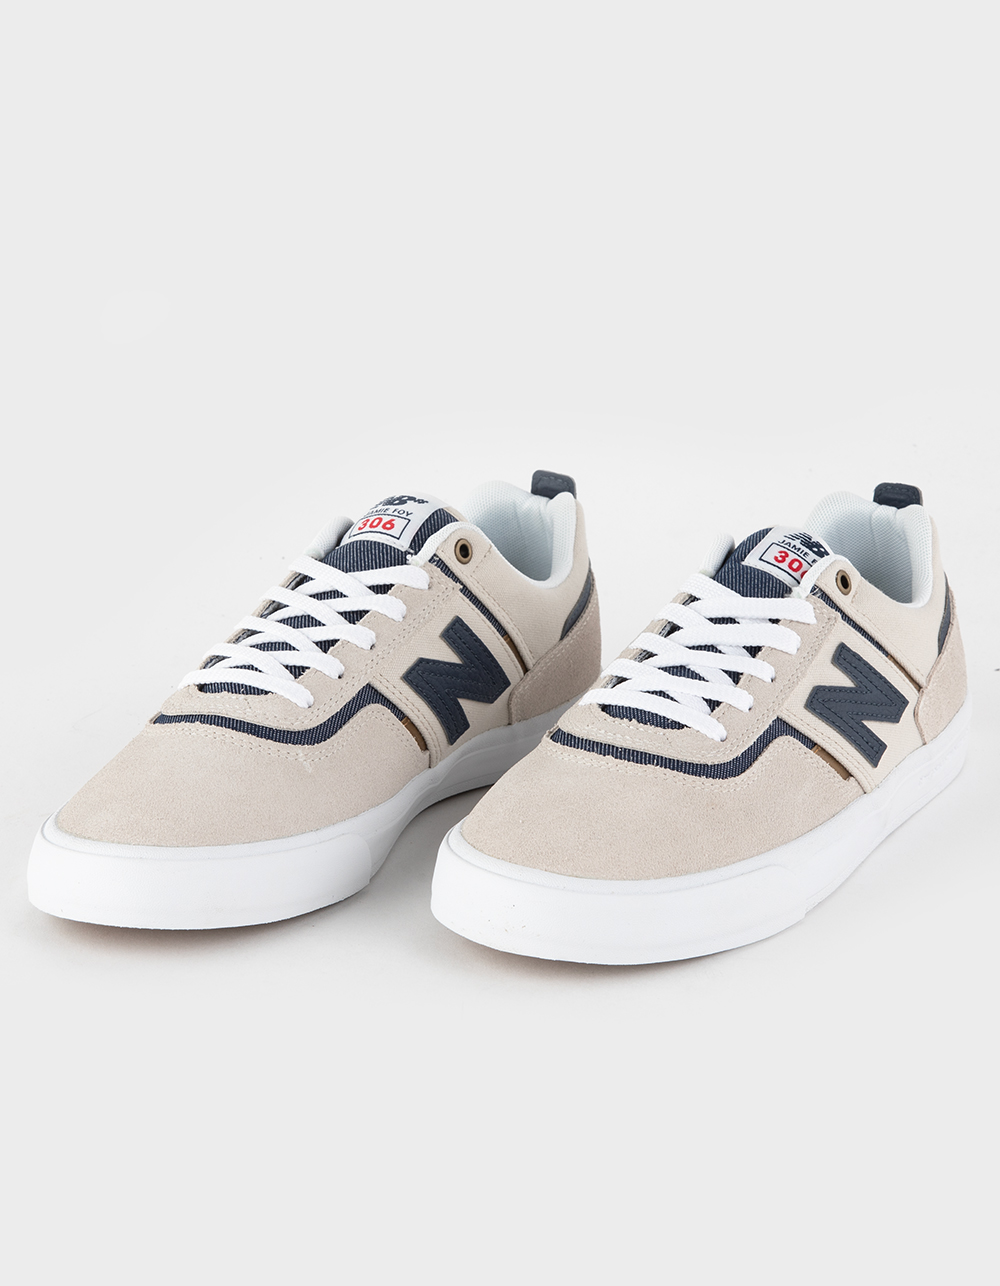 machine Gewoon huisvrouw NEW BALANCE Numeric Jamie Foy 306 Mens Shoes - OFF WHITE | Tillys